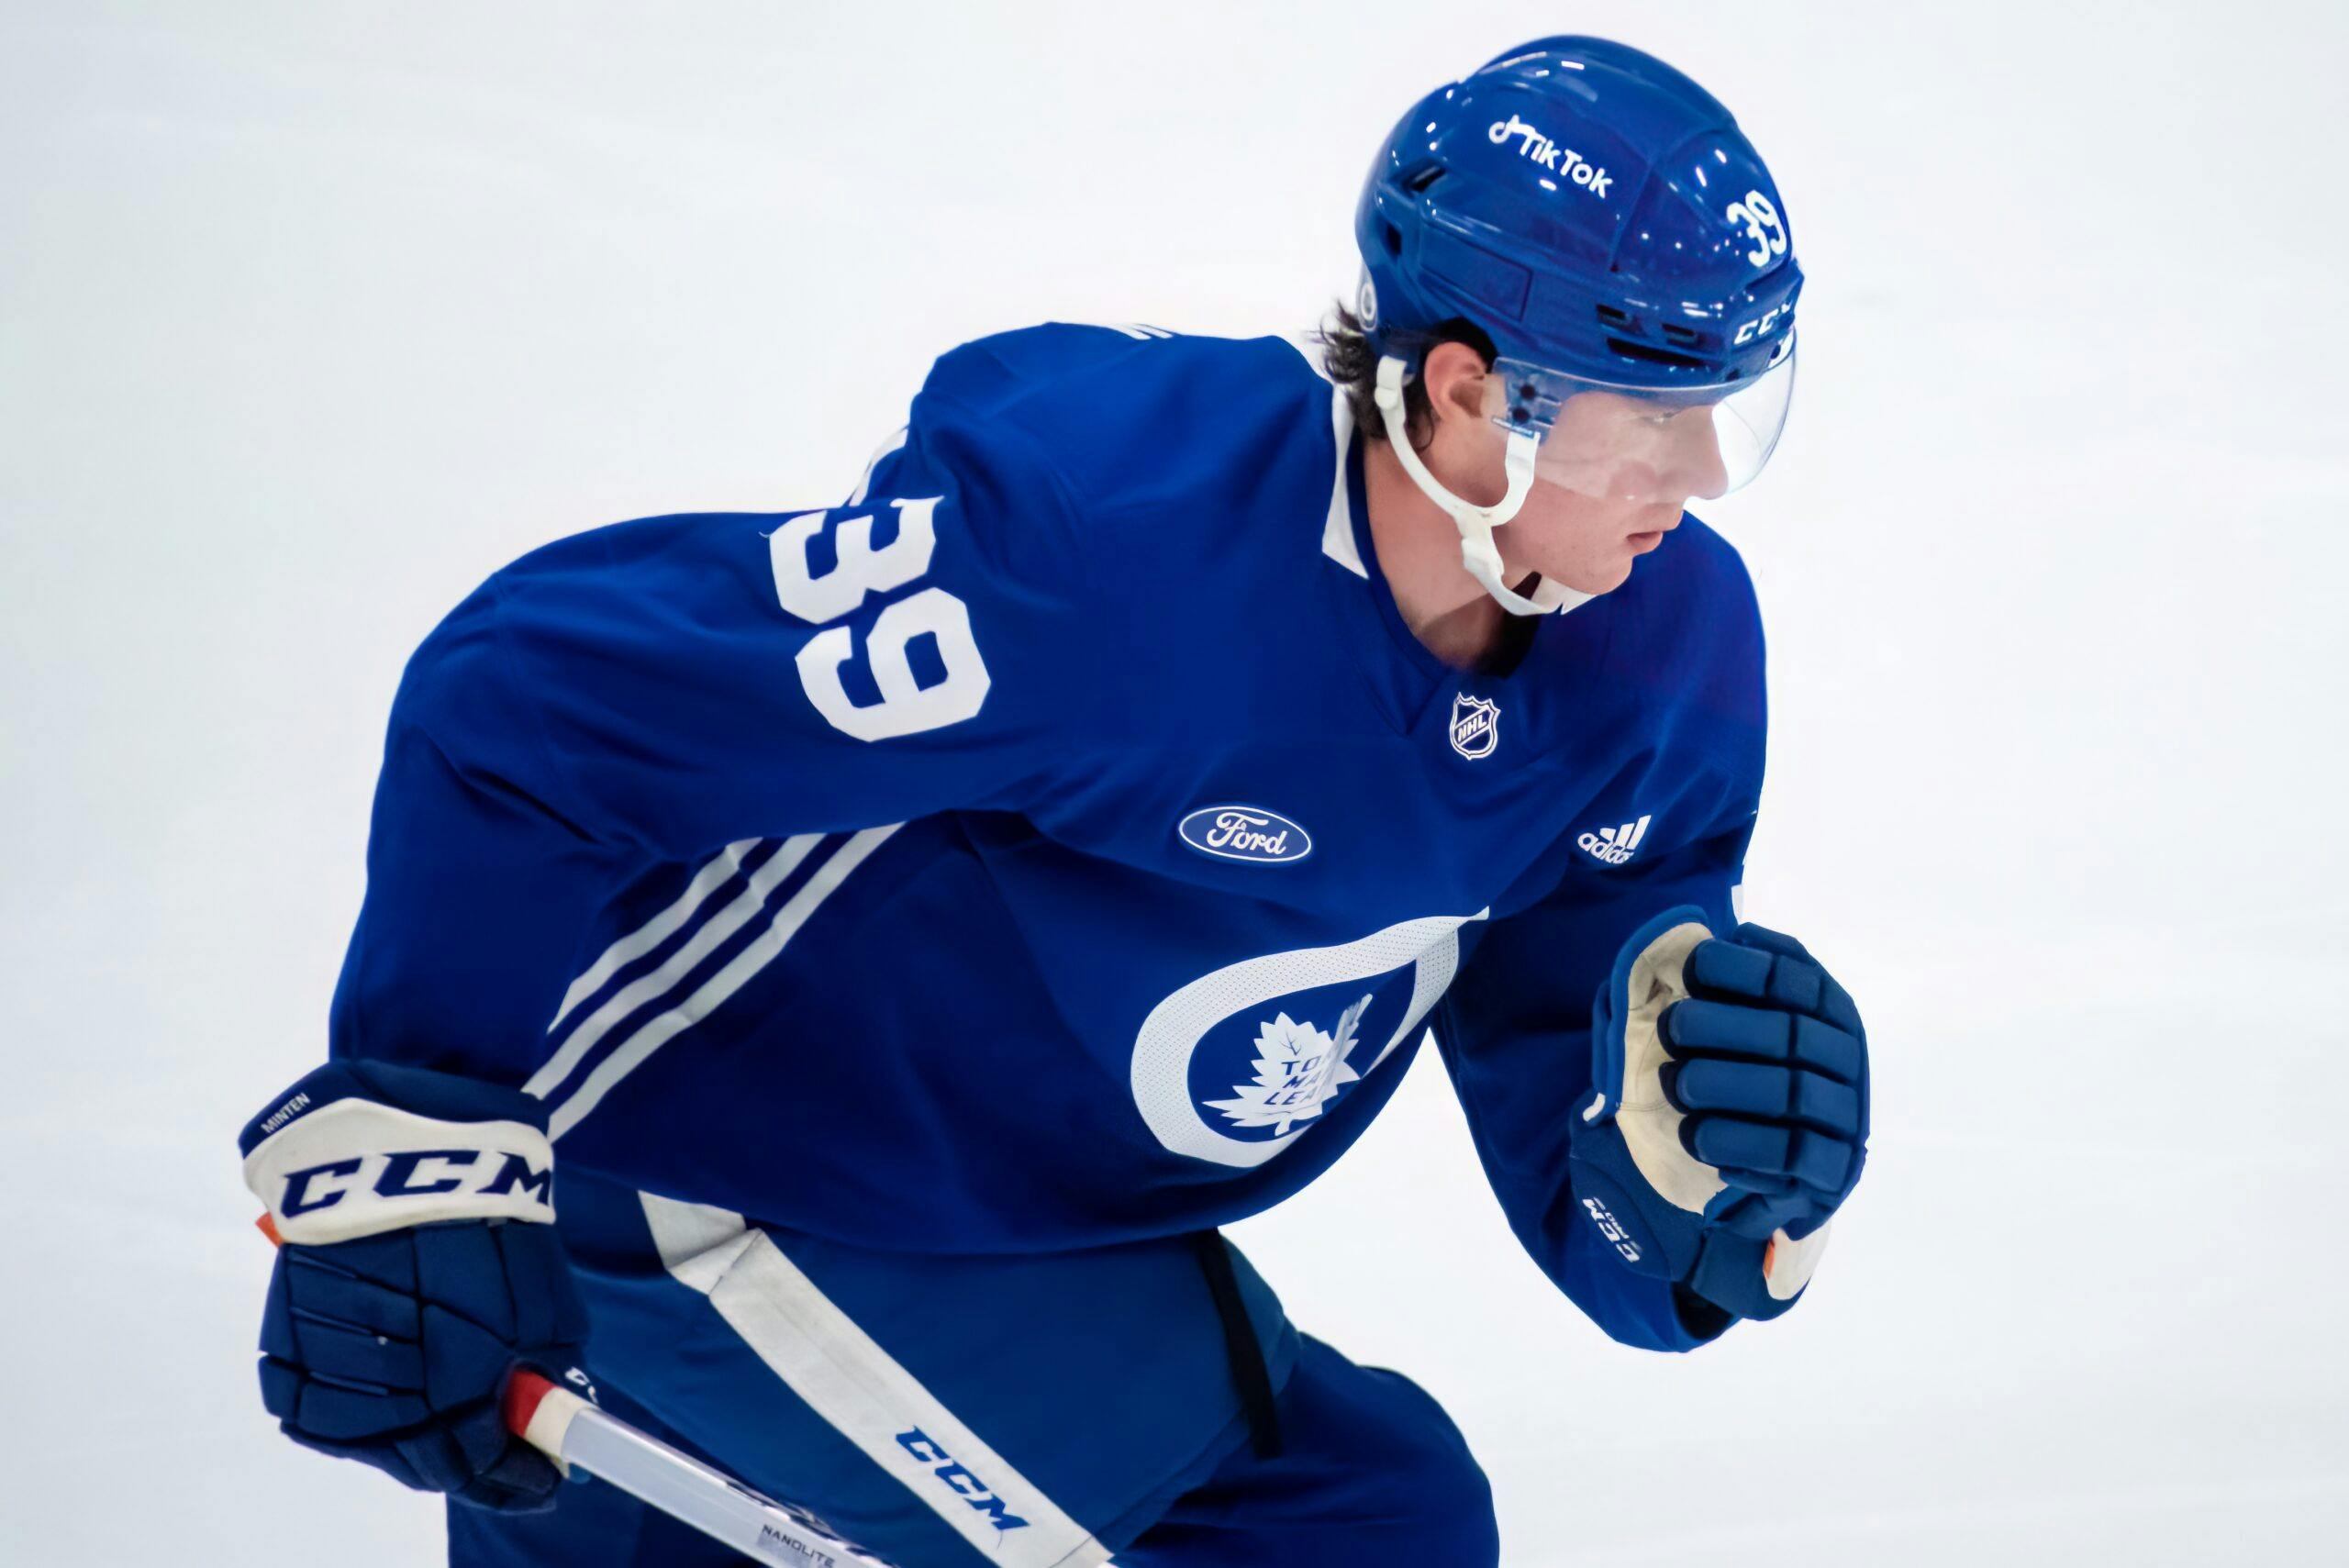 Maple Leafs Prospect Robertson Hopes to Make an Impact – On and